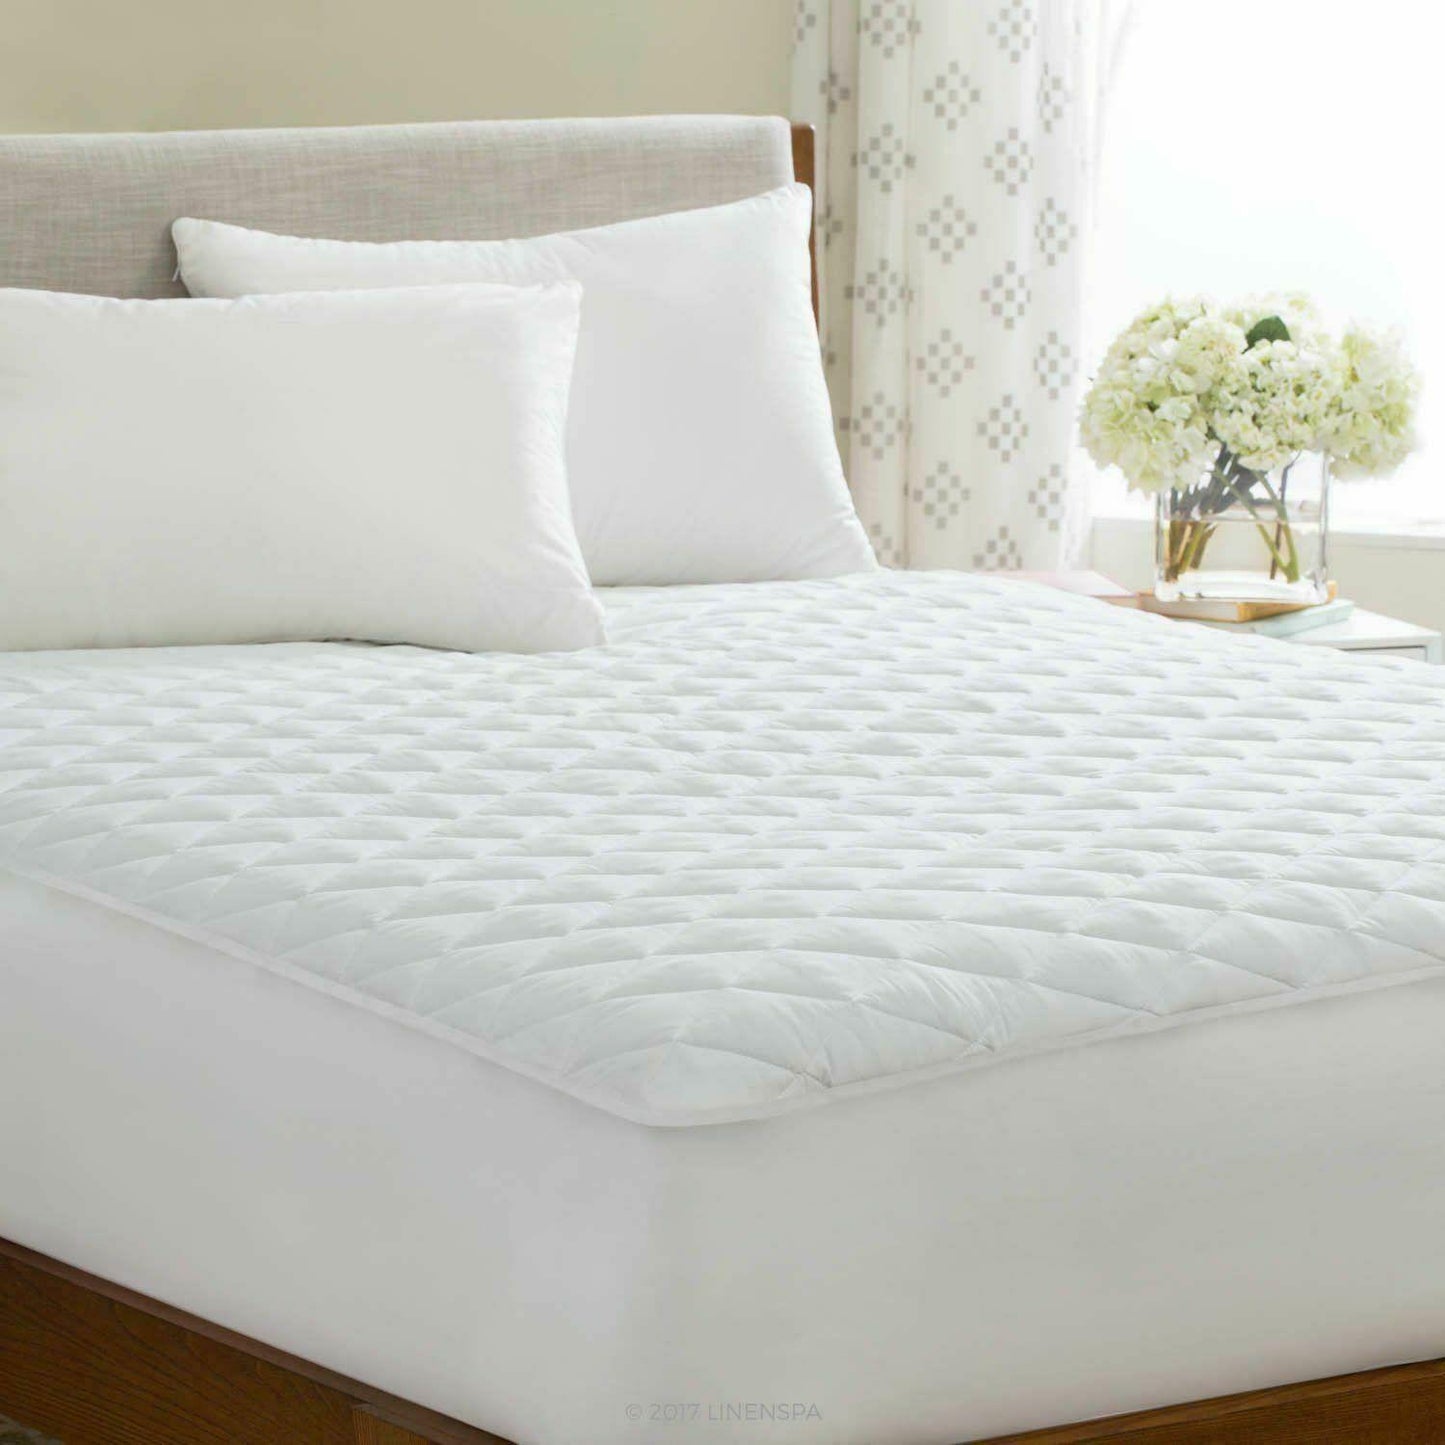 30cm Extra Deep Mattress Quilted Protector Hollowfibre Elasticated Skirt - TheComfortshop.co.ukMattress ProtectorsthecomfortshopTheComfortshop.co.ukMP Quilted King NZKing Only30cm Extra Deep Mattress Quilted Protector Hollowfibre Elasticated Skirt - TheComfortshop.co.uk